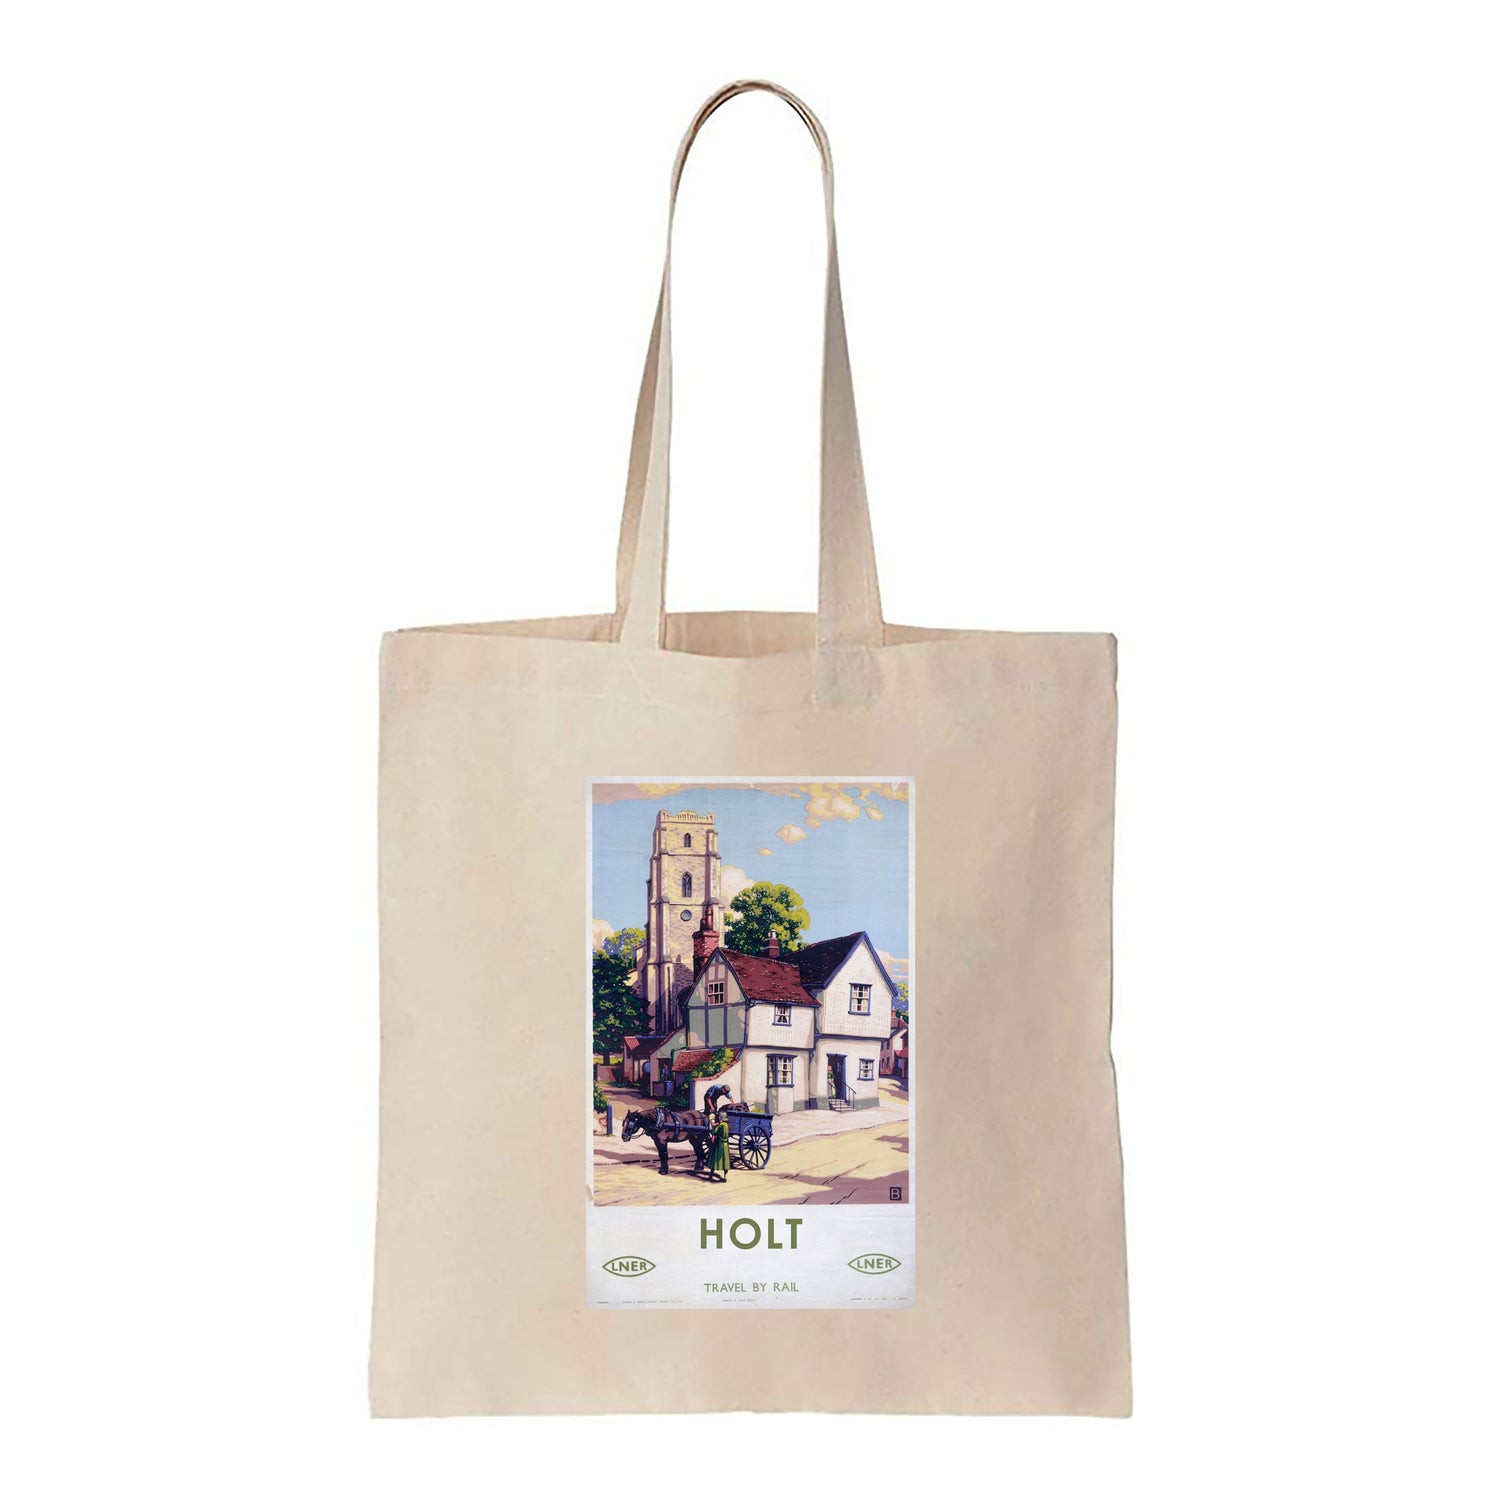 Holt - Travel By Rail - Canvas Tote Bag